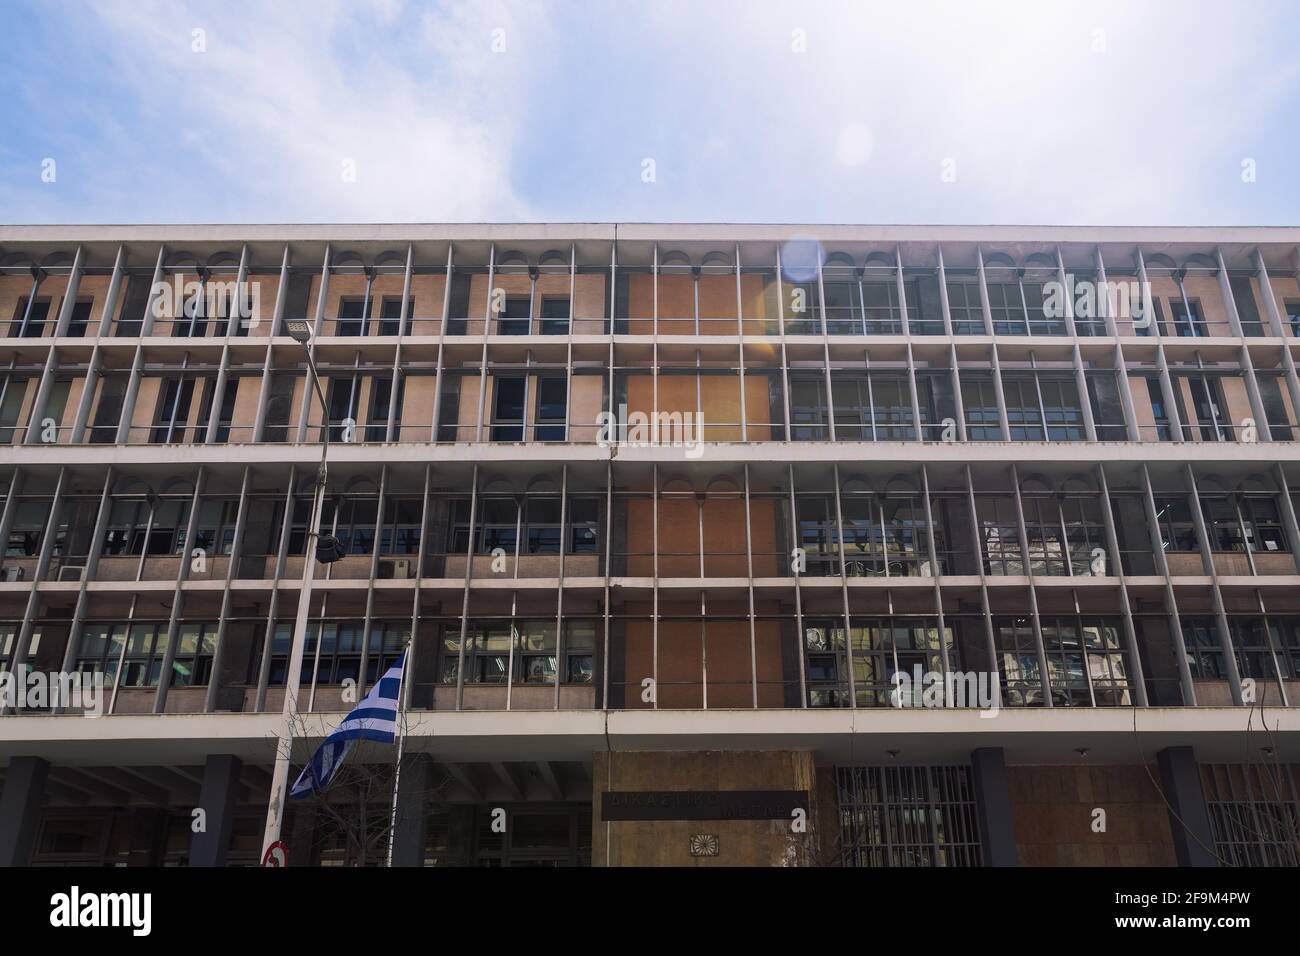 Thessaloniki, Greece Courthouse facade with Hellenic flag waving. Exterior day low angle view of courts of justice building with sign. Stock Photo